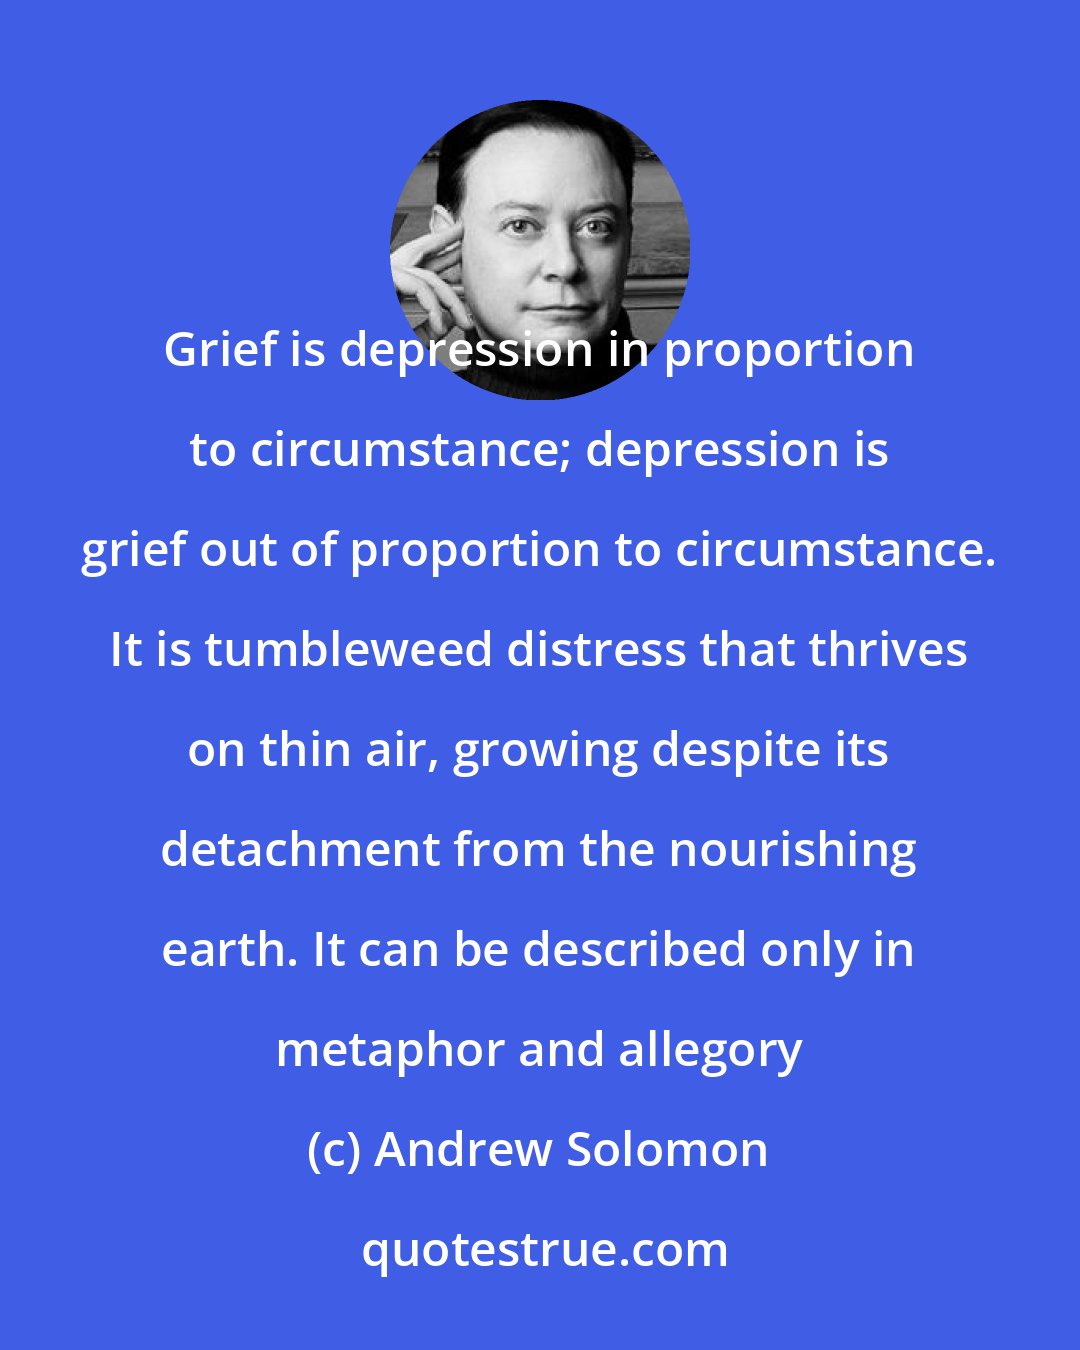 Andrew Solomon: Grief is depression in proportion to circumstance; depression is grief out of proportion to circumstance. It is tumbleweed distress that thrives on thin air, growing despite its detachment from the nourishing earth. It can be described only in metaphor and allegory